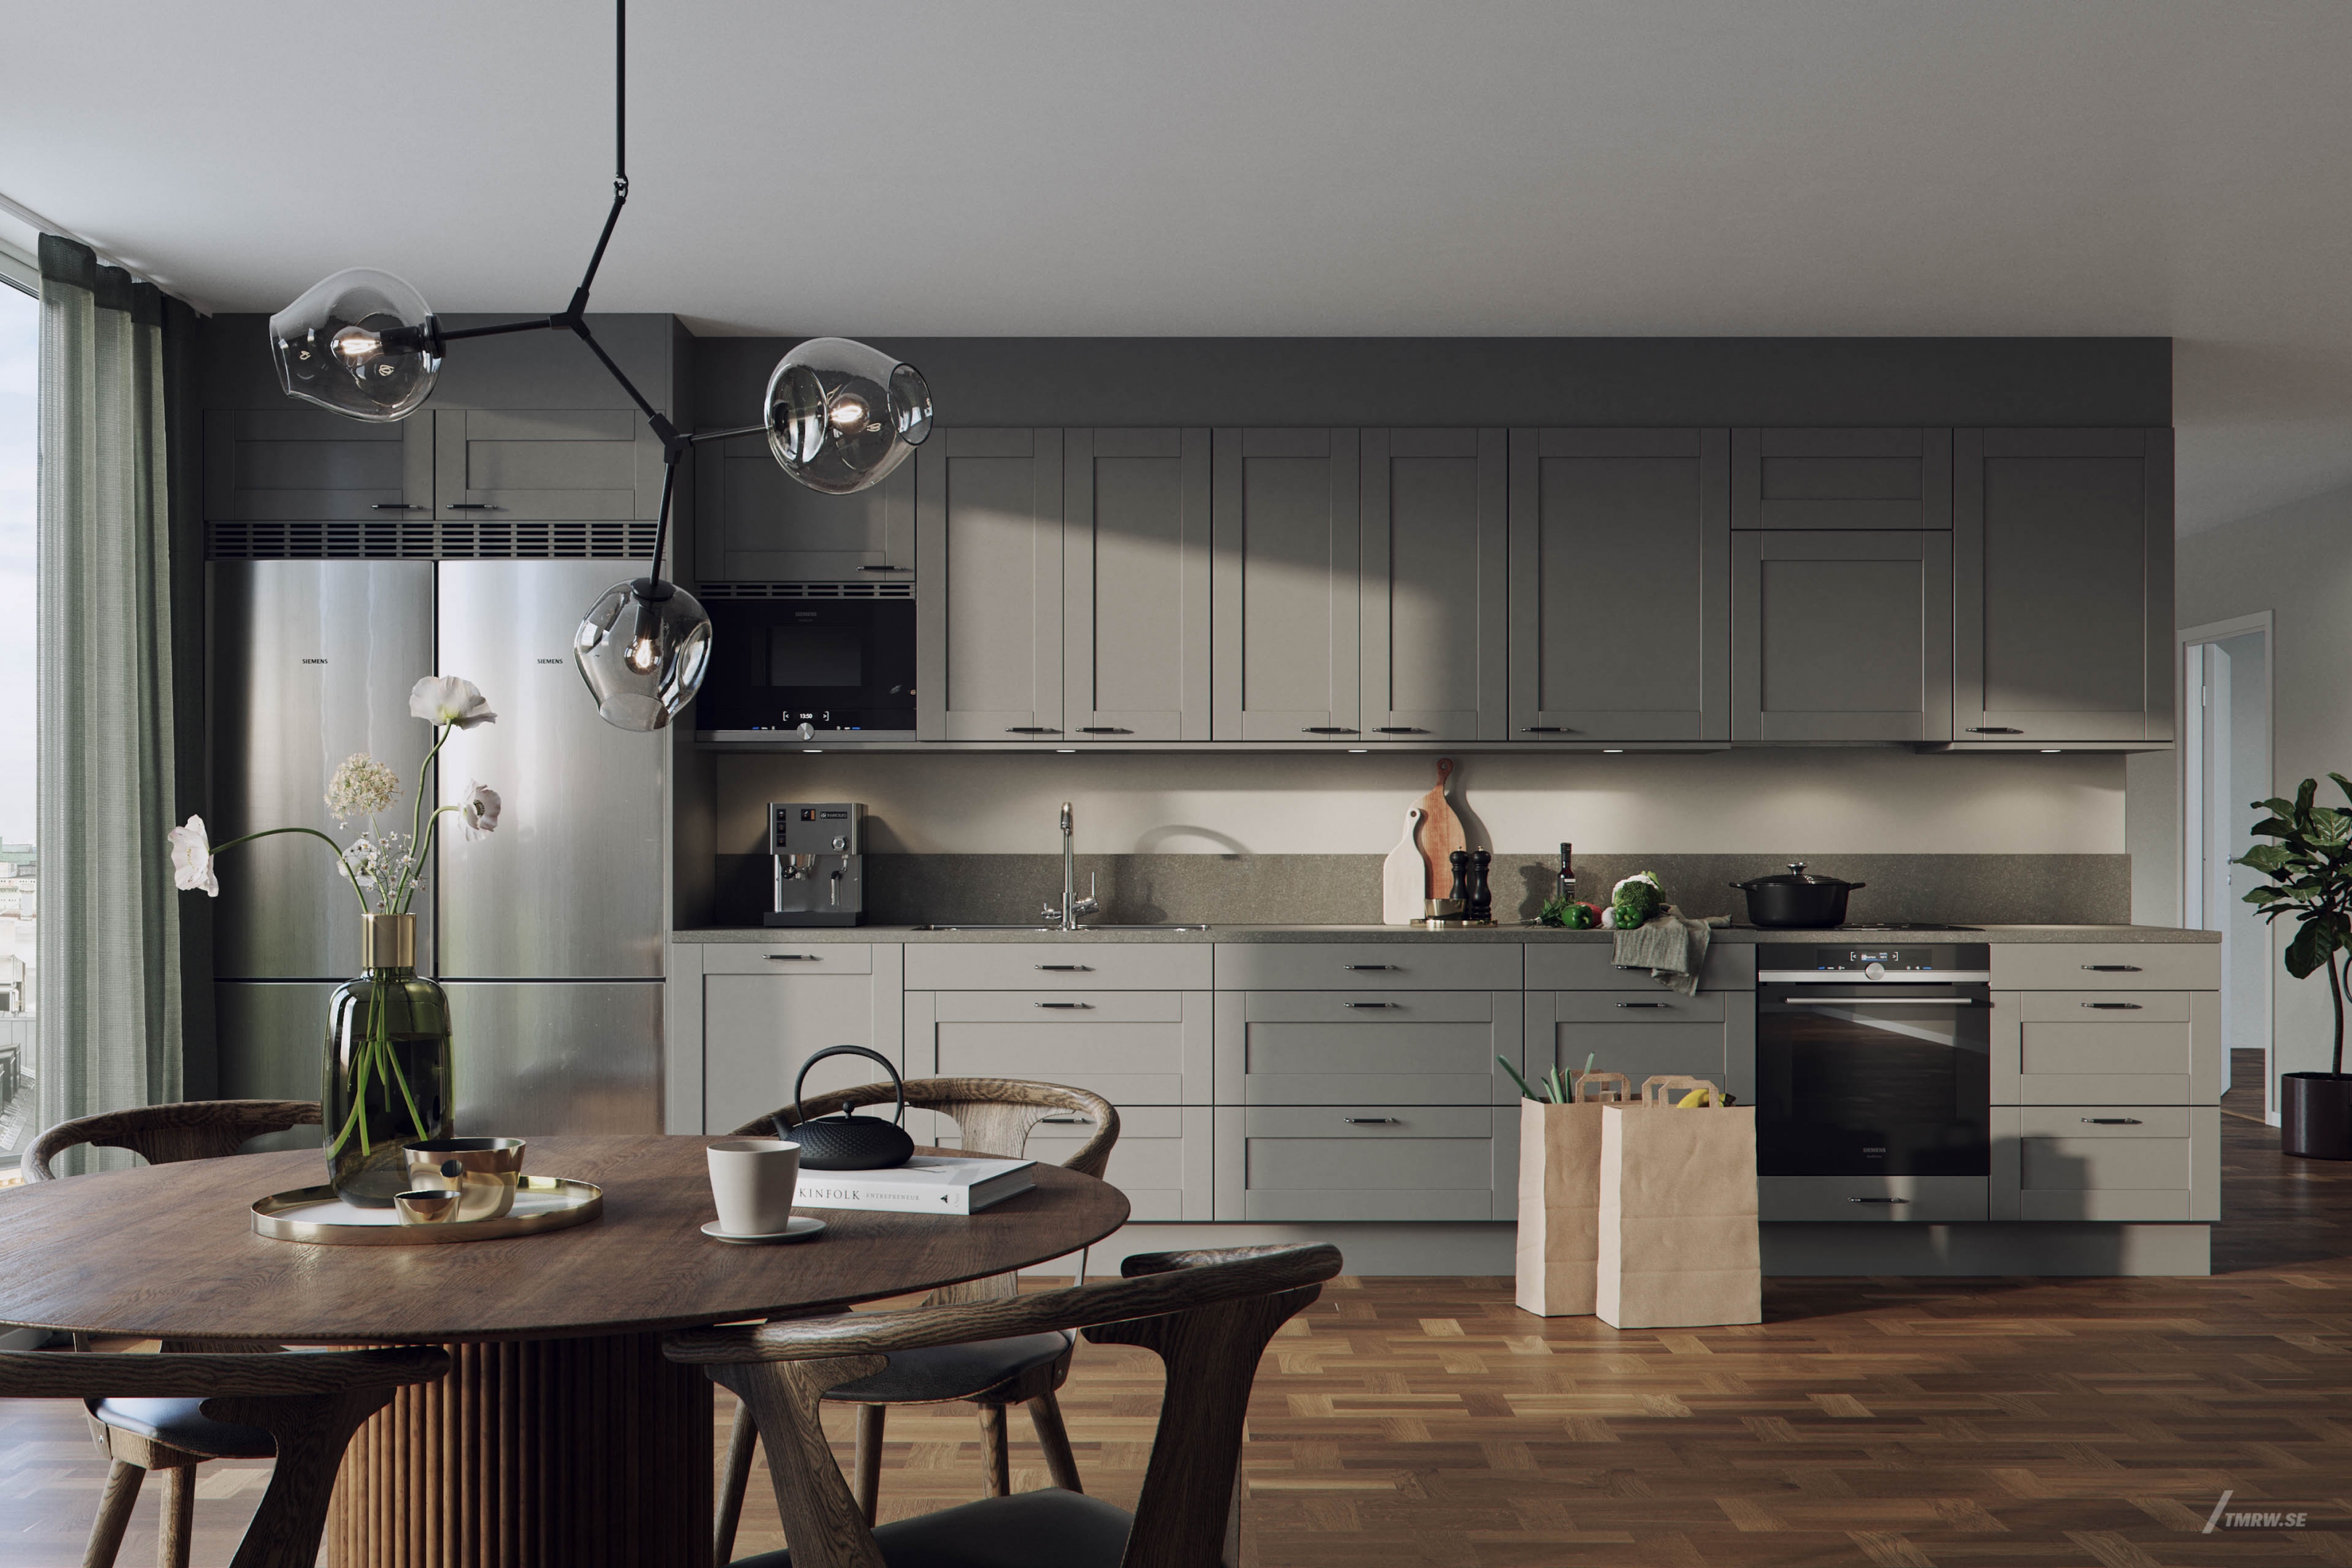 Architectural visualization of Exclusive for Nordr, kitchen in day light from a interior view